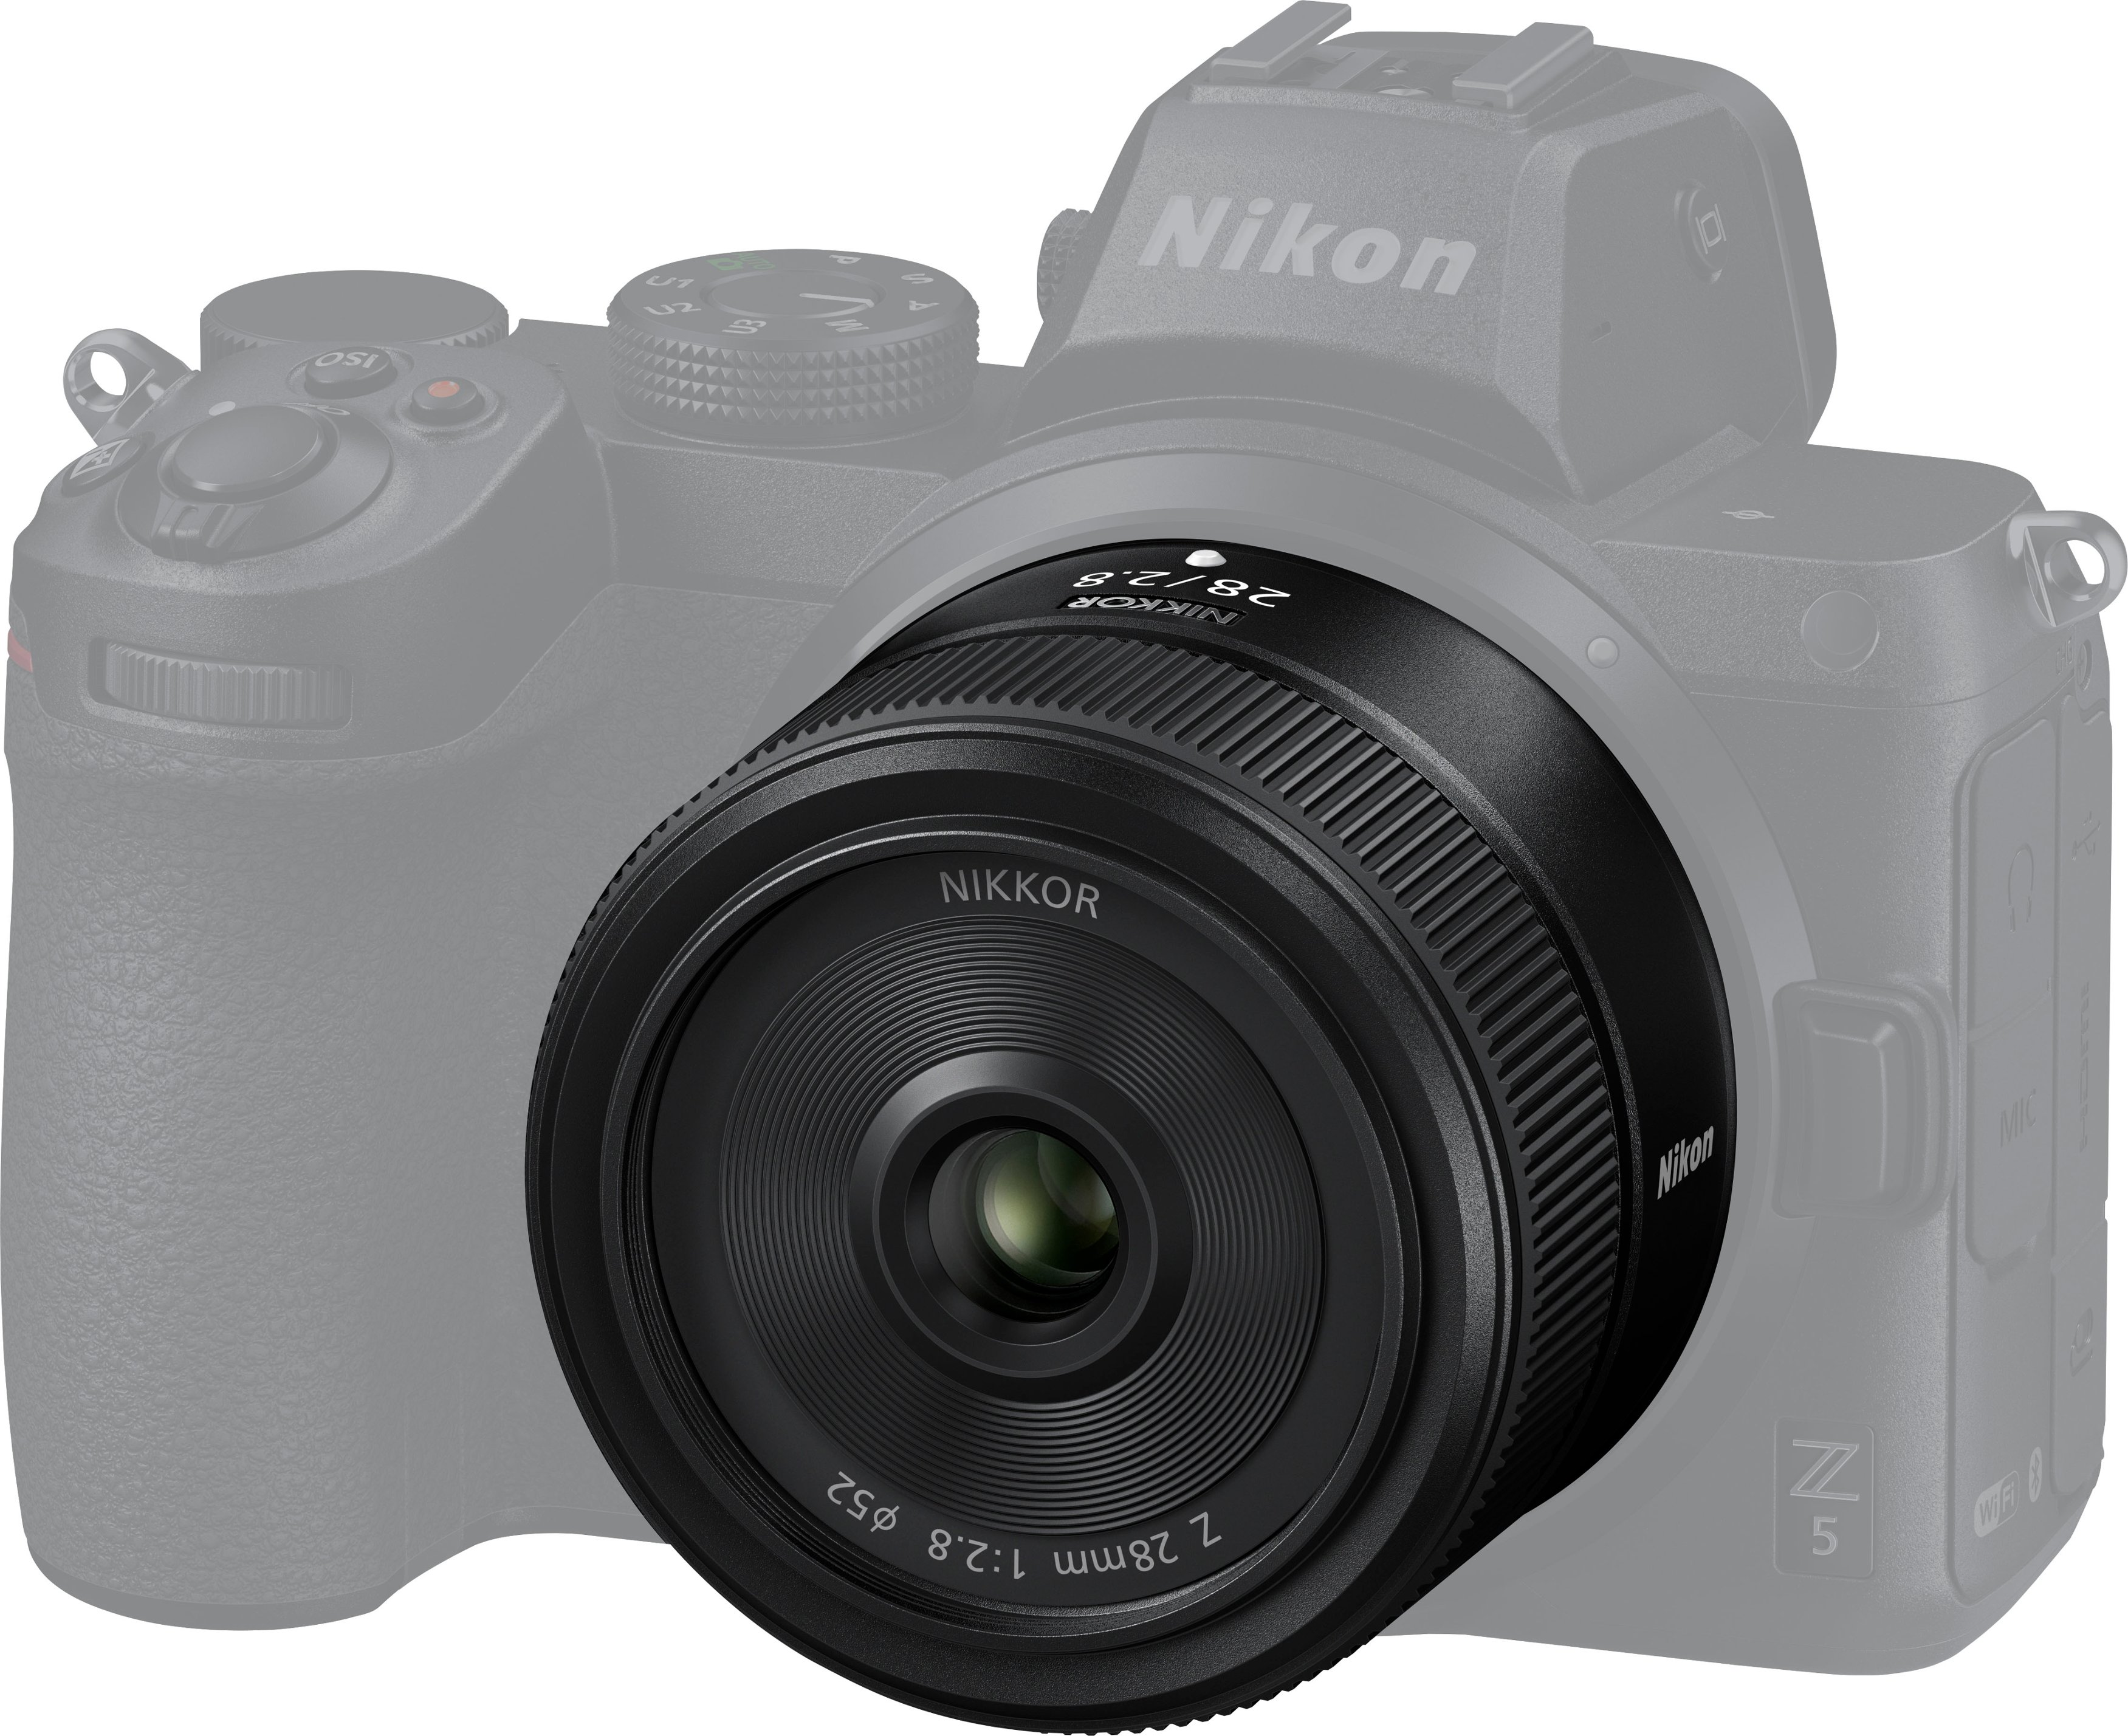 Angle View: Nikon - D7500 DSLR 4K Video Two Lens Kit with 18-55mm and 70-300mm Lenses - Black